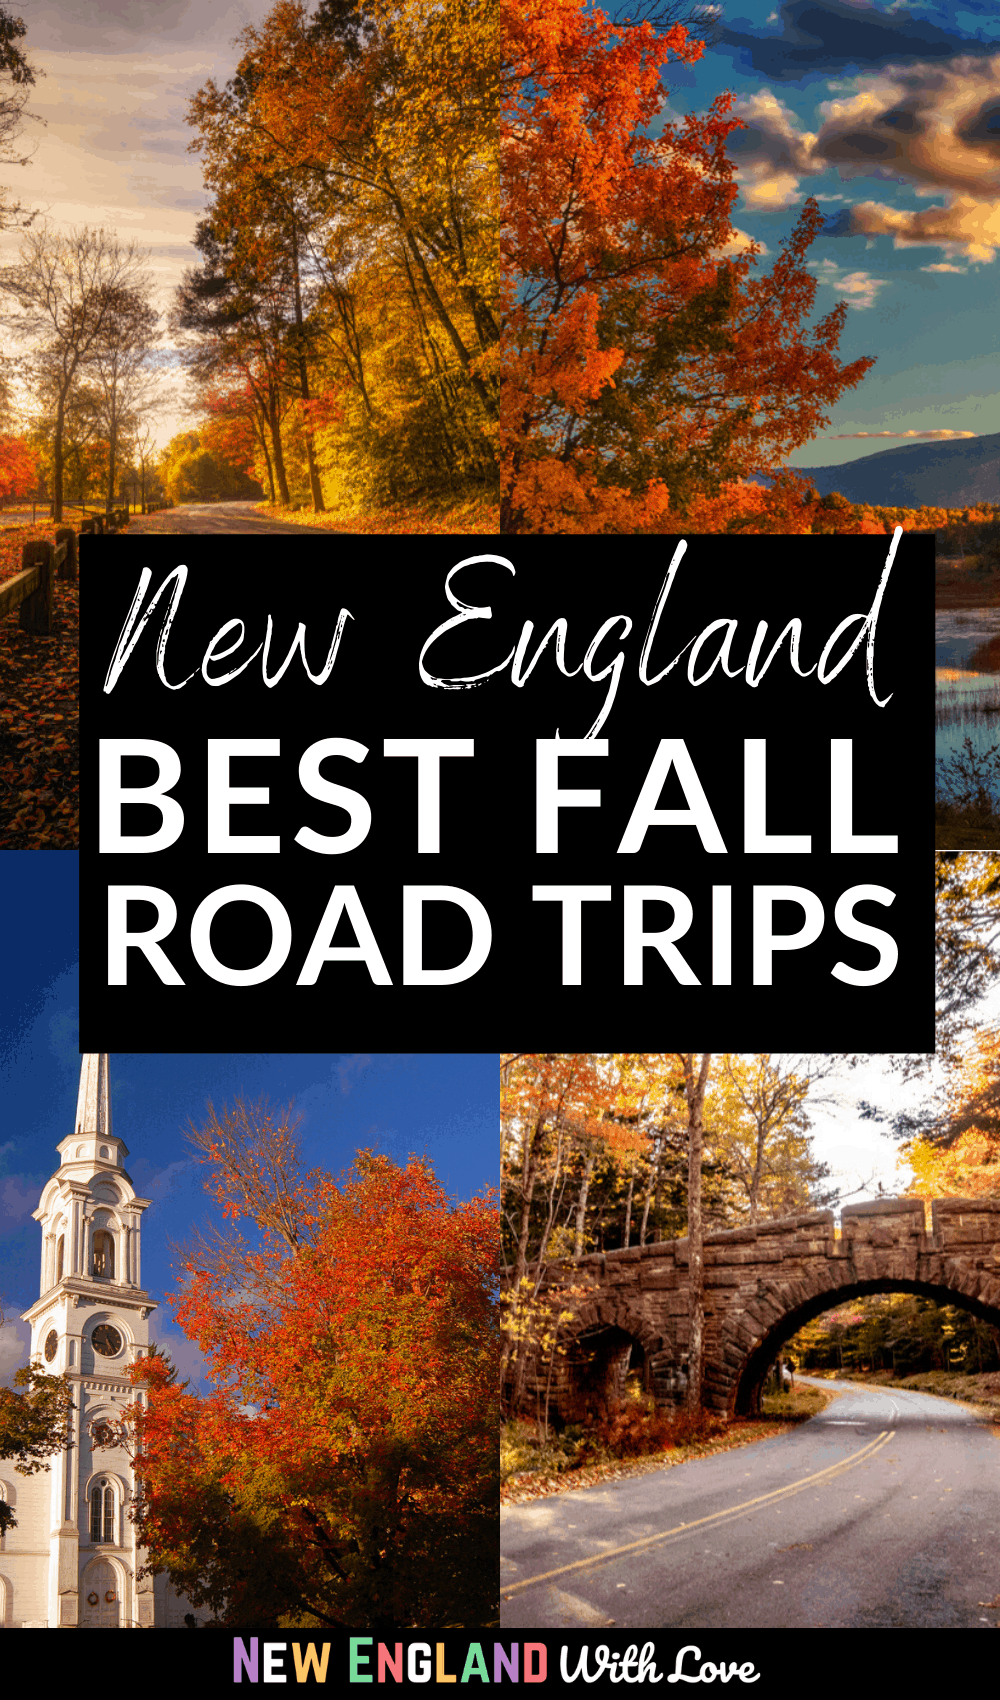 Pinterest graphic reading "New England BEST FALL ROAD TRIPS"